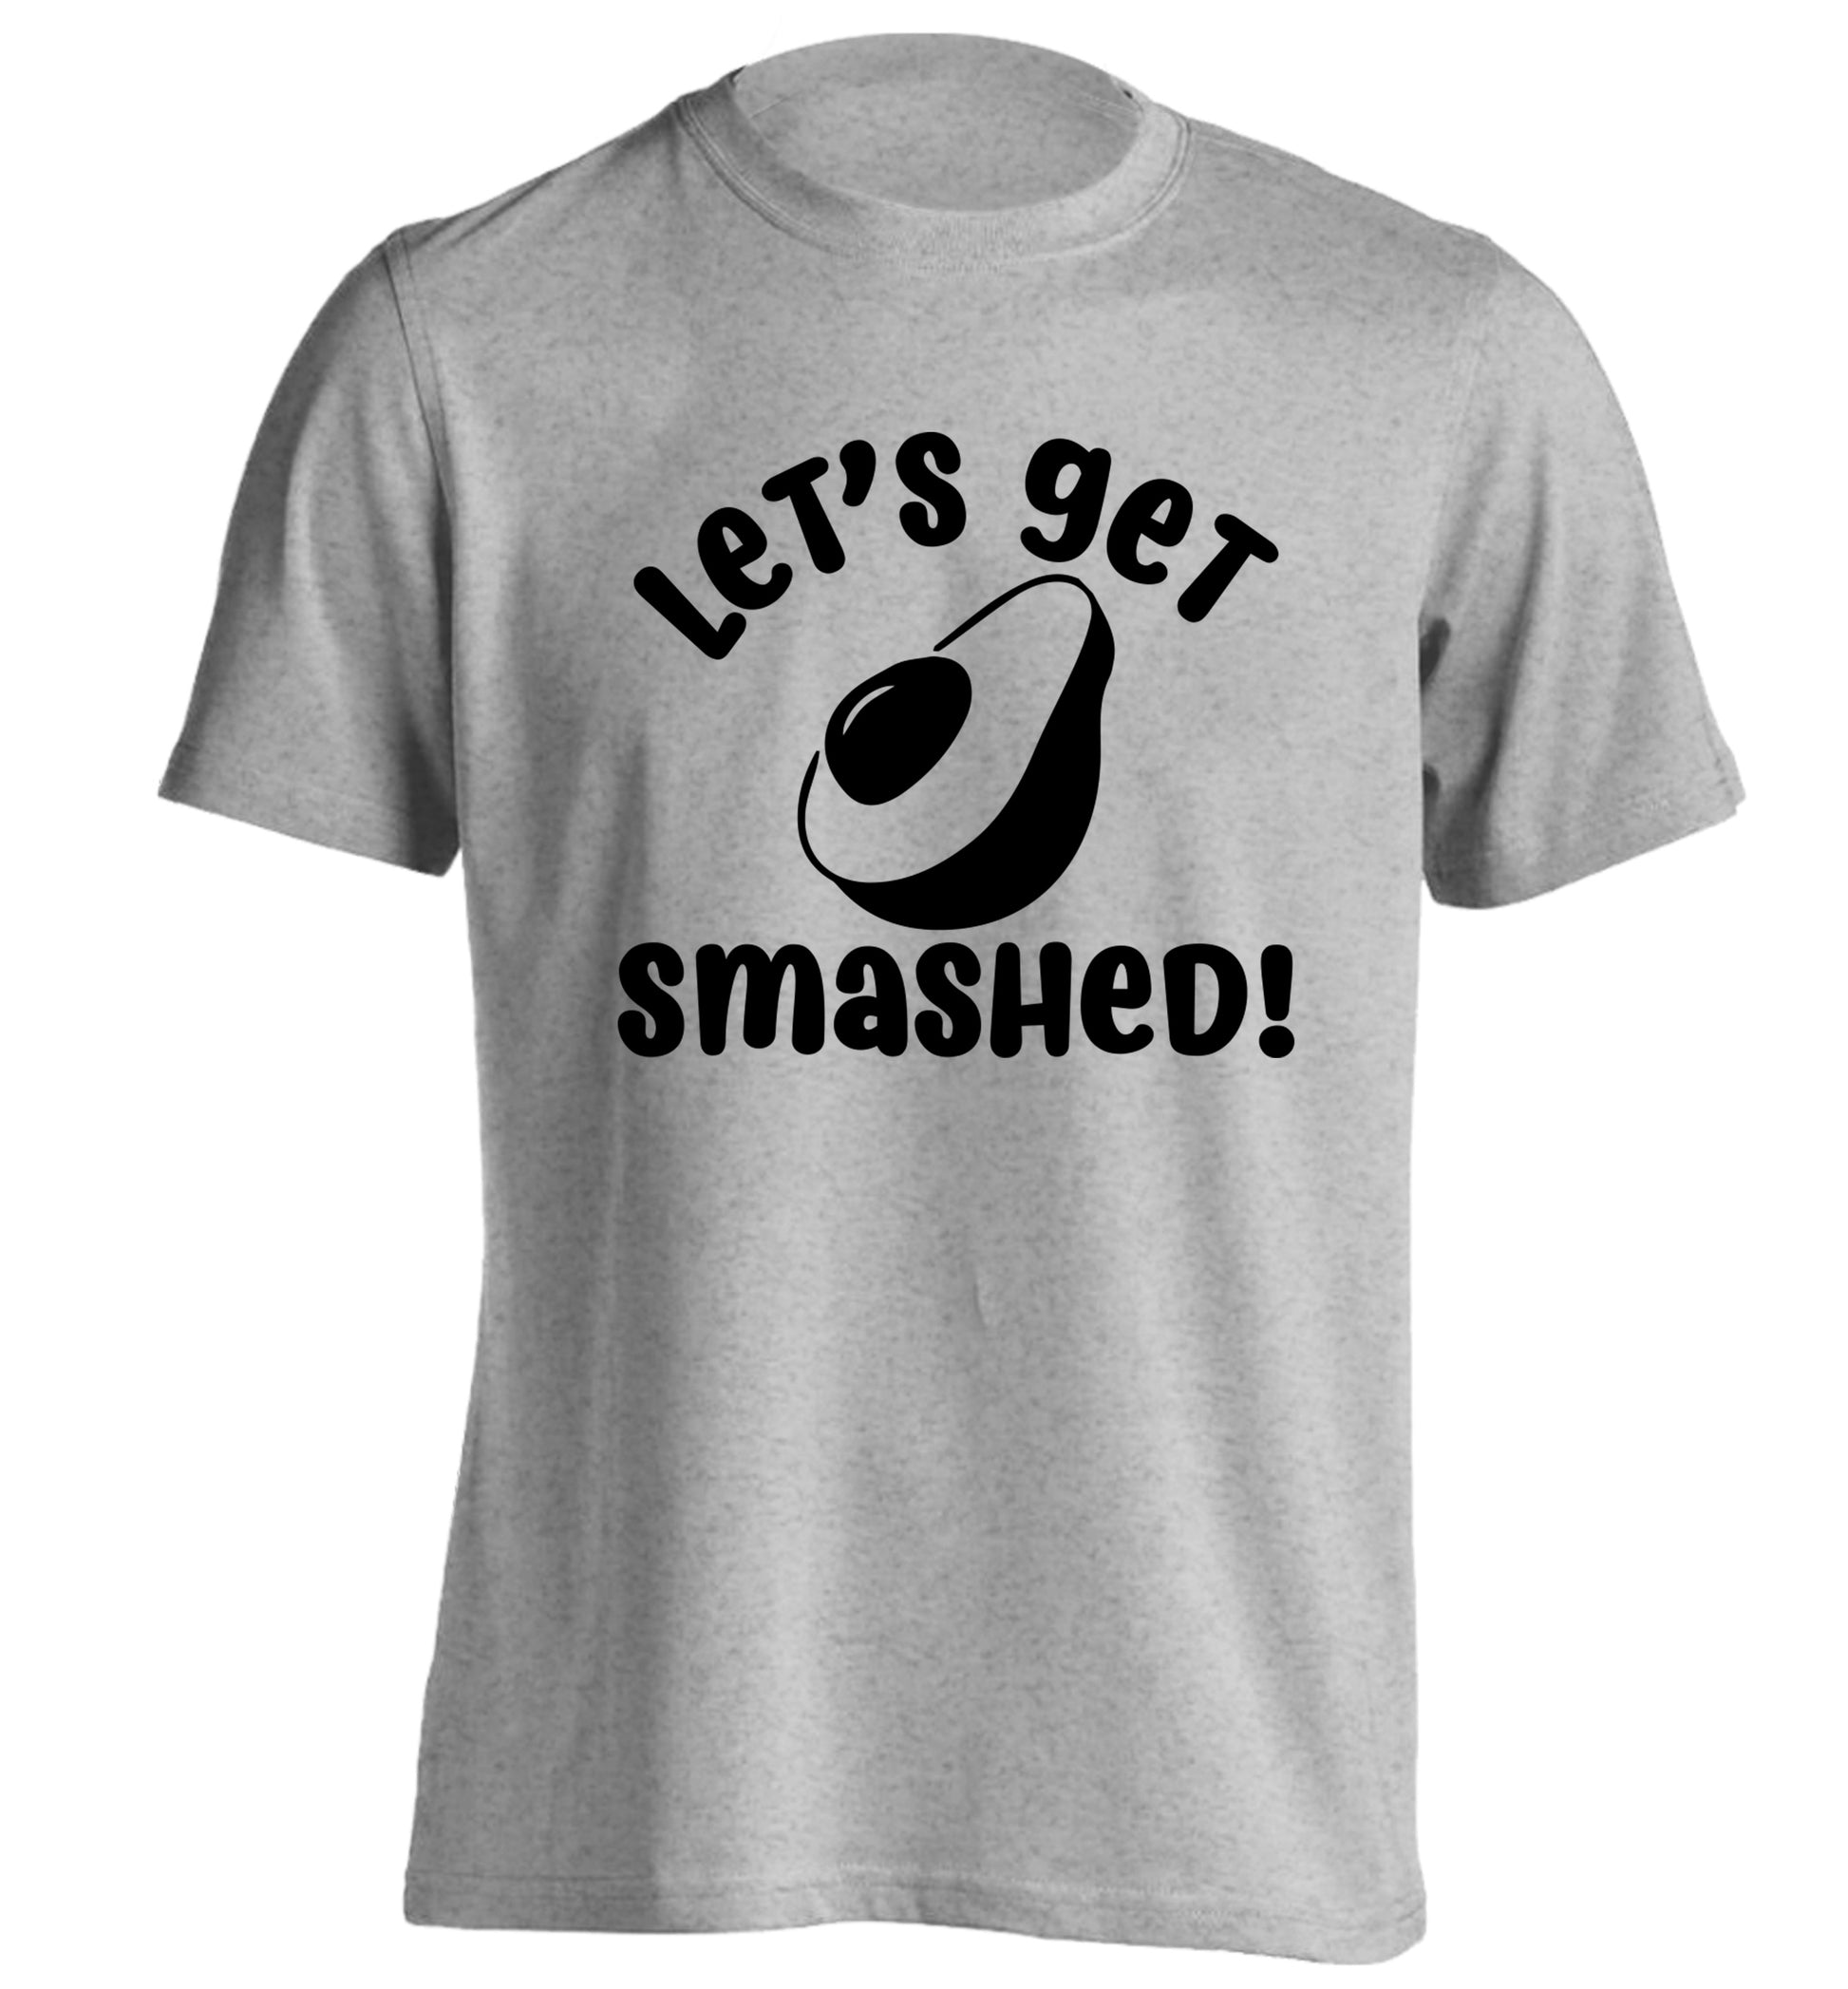 Let's get smashed adults unisex grey Tshirt 2XL